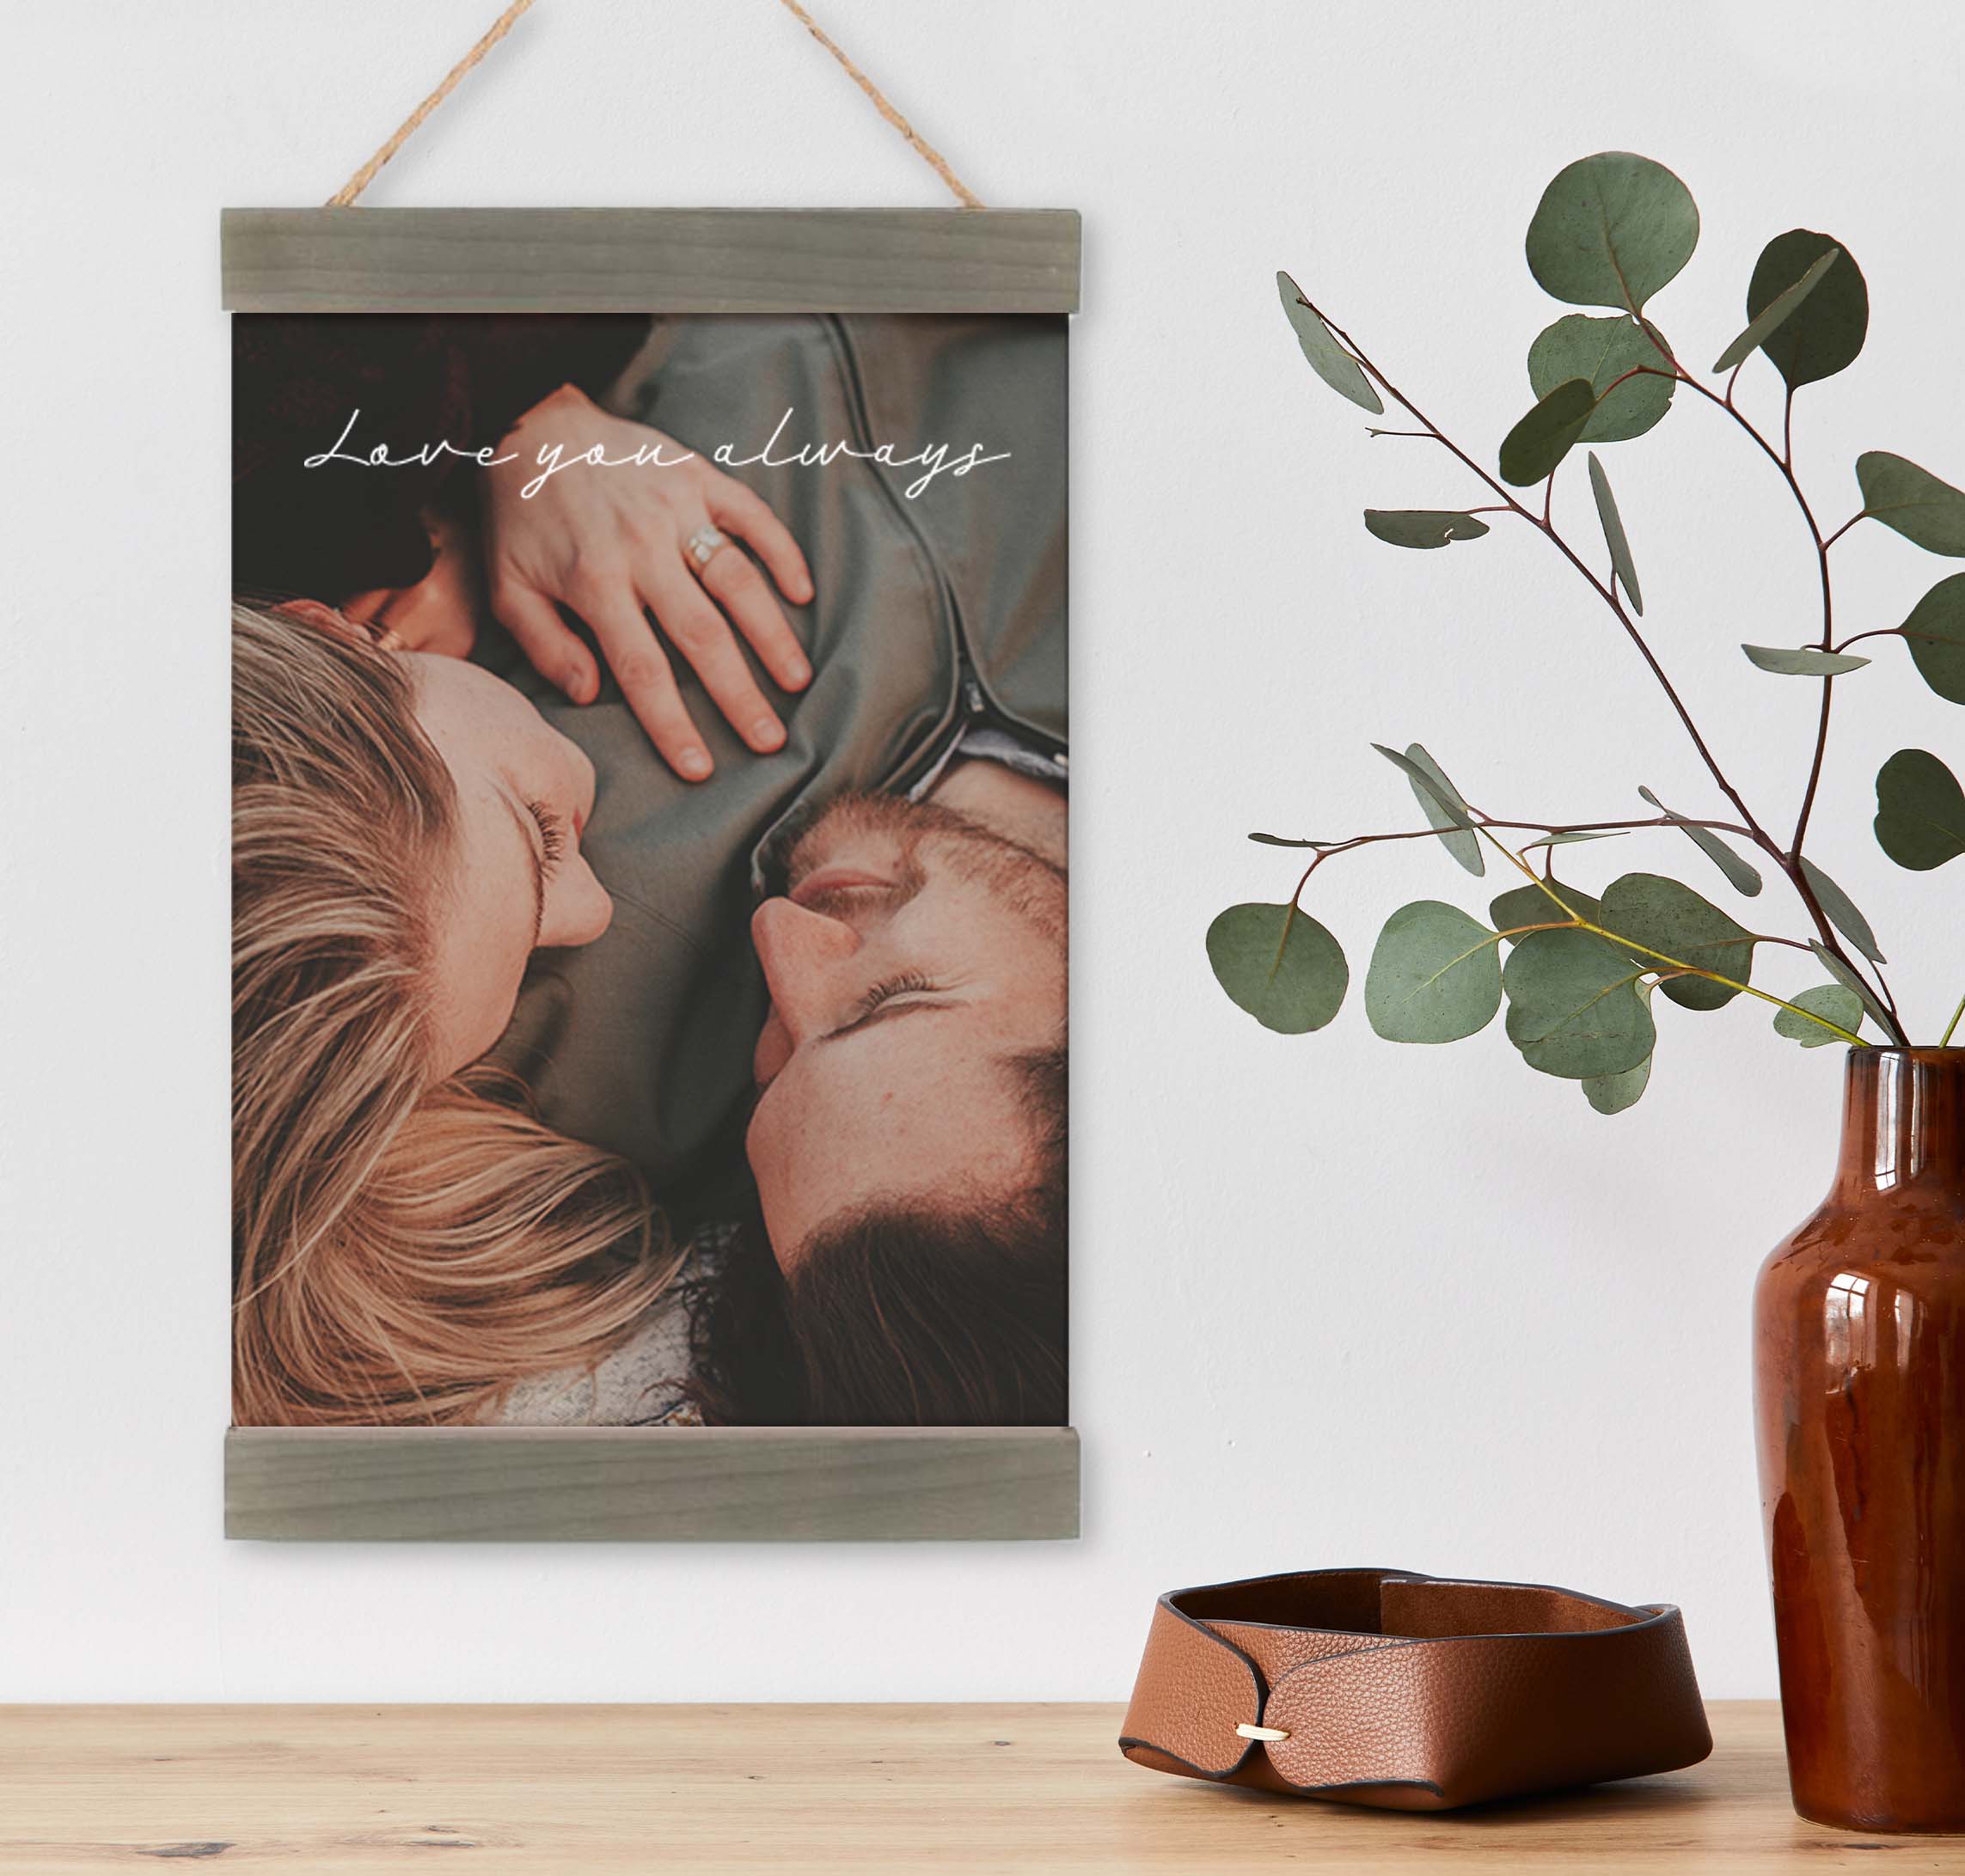 photo of a couple on a canvas wall hanging hung near a table with decor items on it